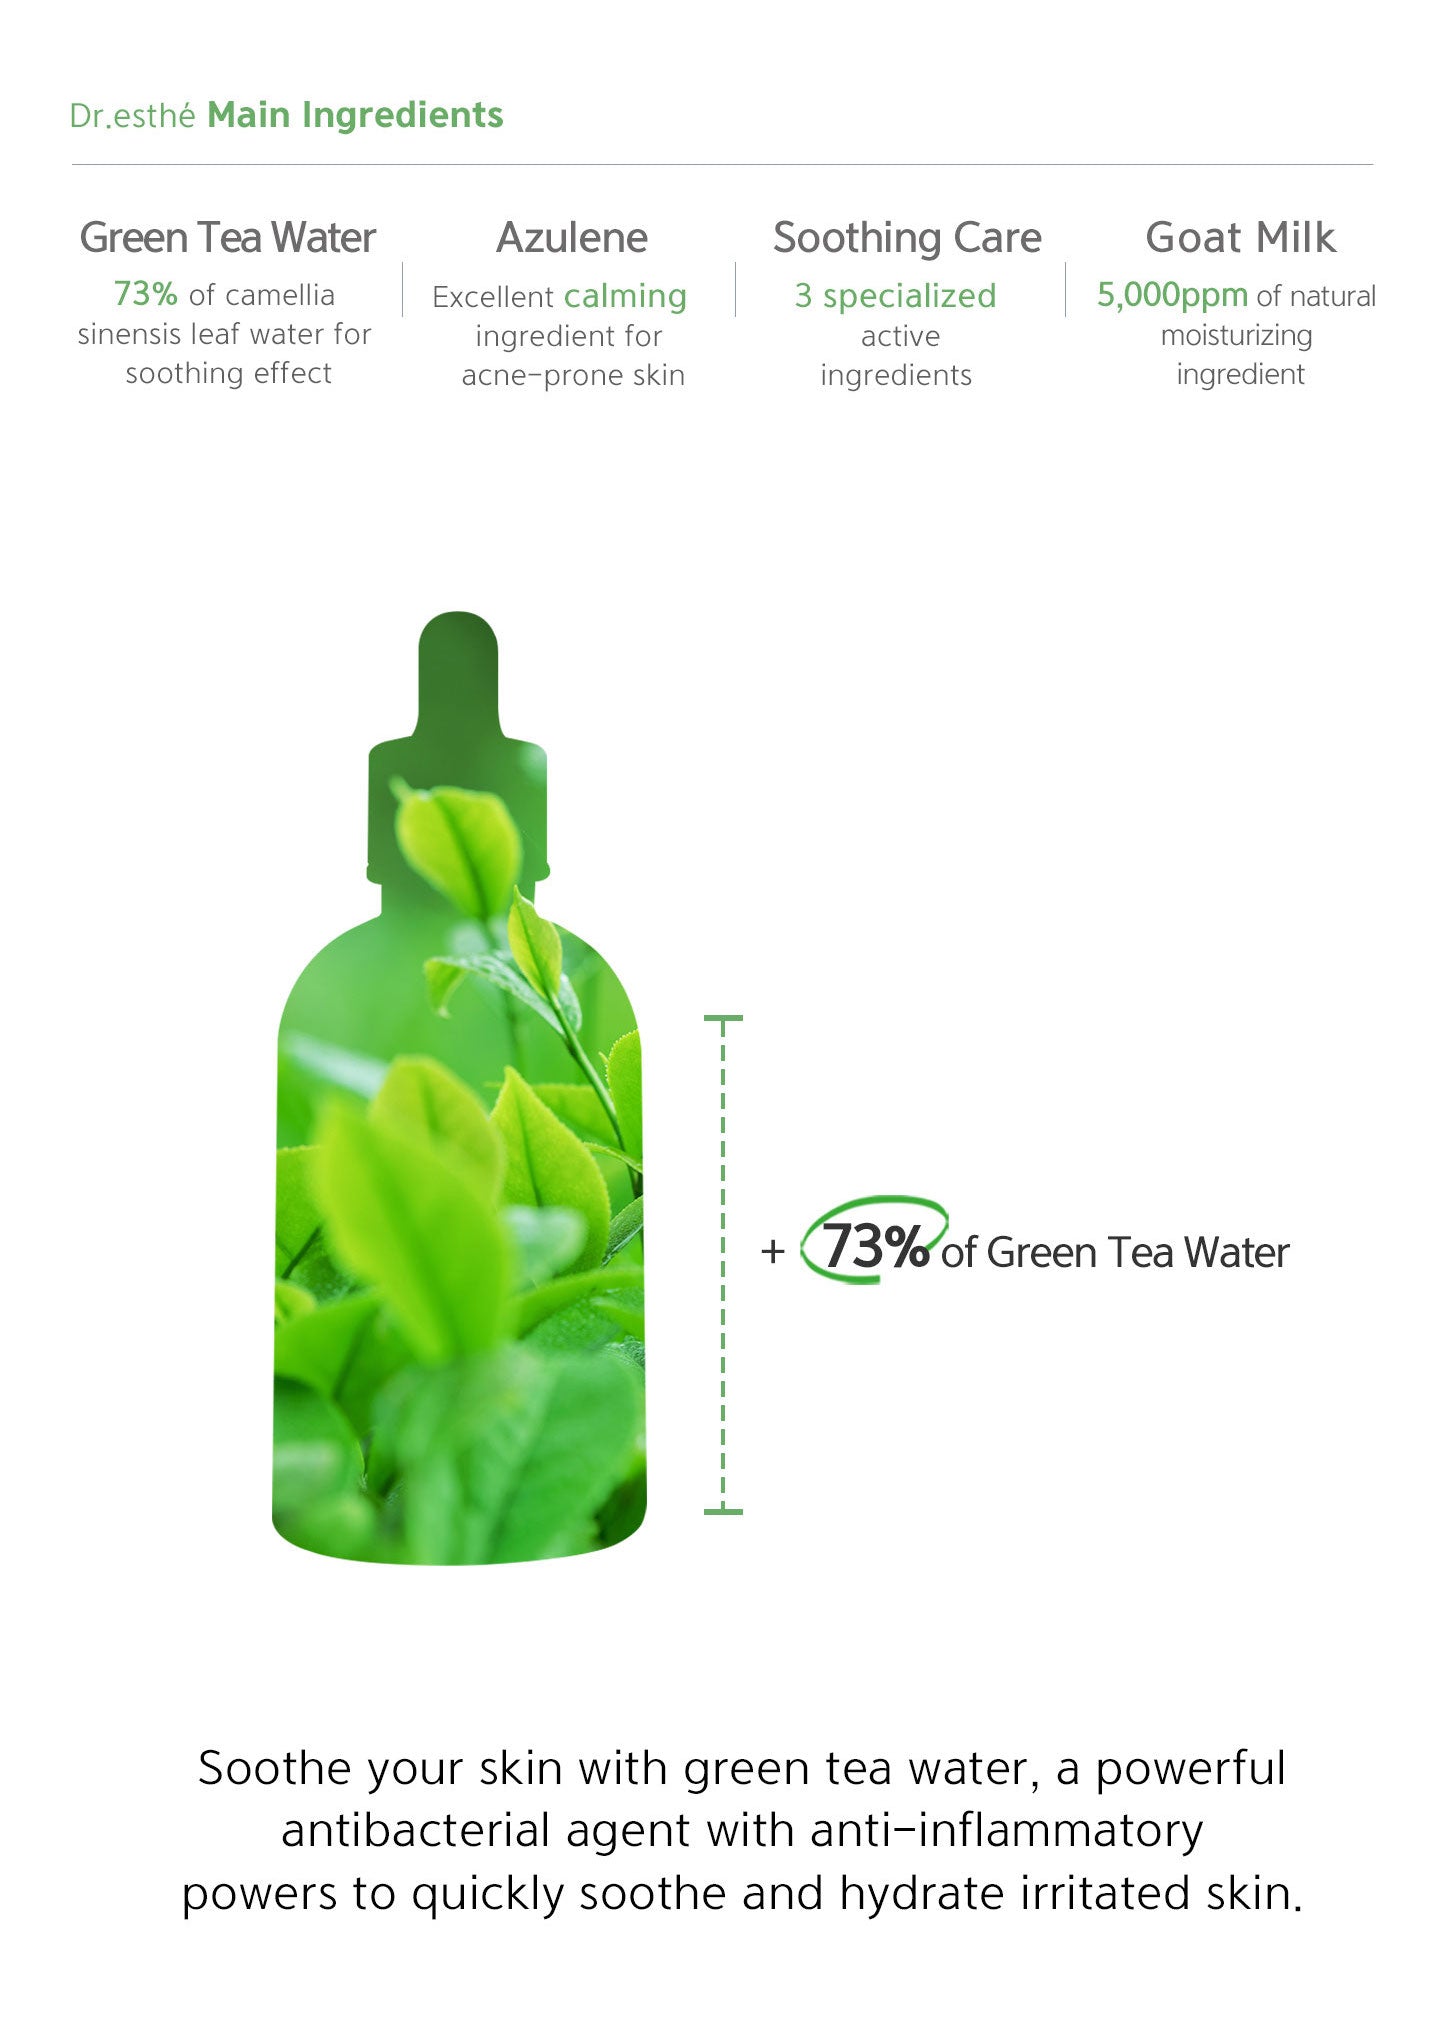 Azulene relief solution ampoule main ingredients: 73% green tea water, azulene, soothing care and goat milk. 